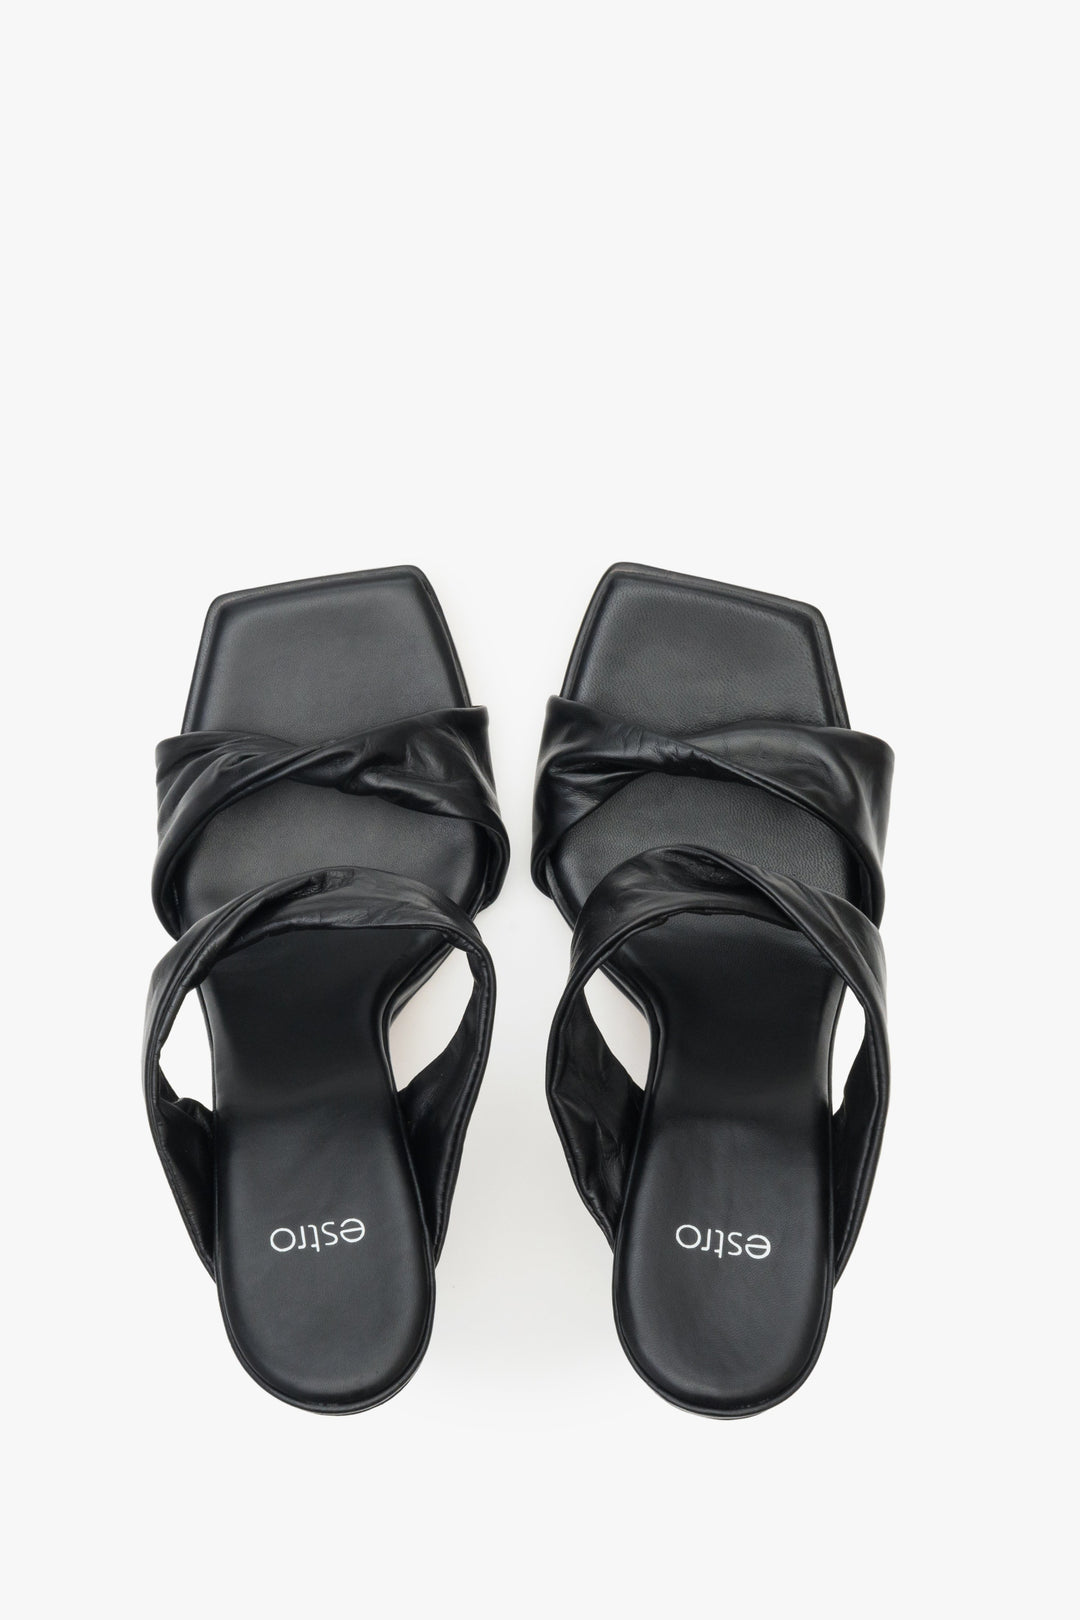 Leather women's sandals by Estro in black - top view presentation of the model.